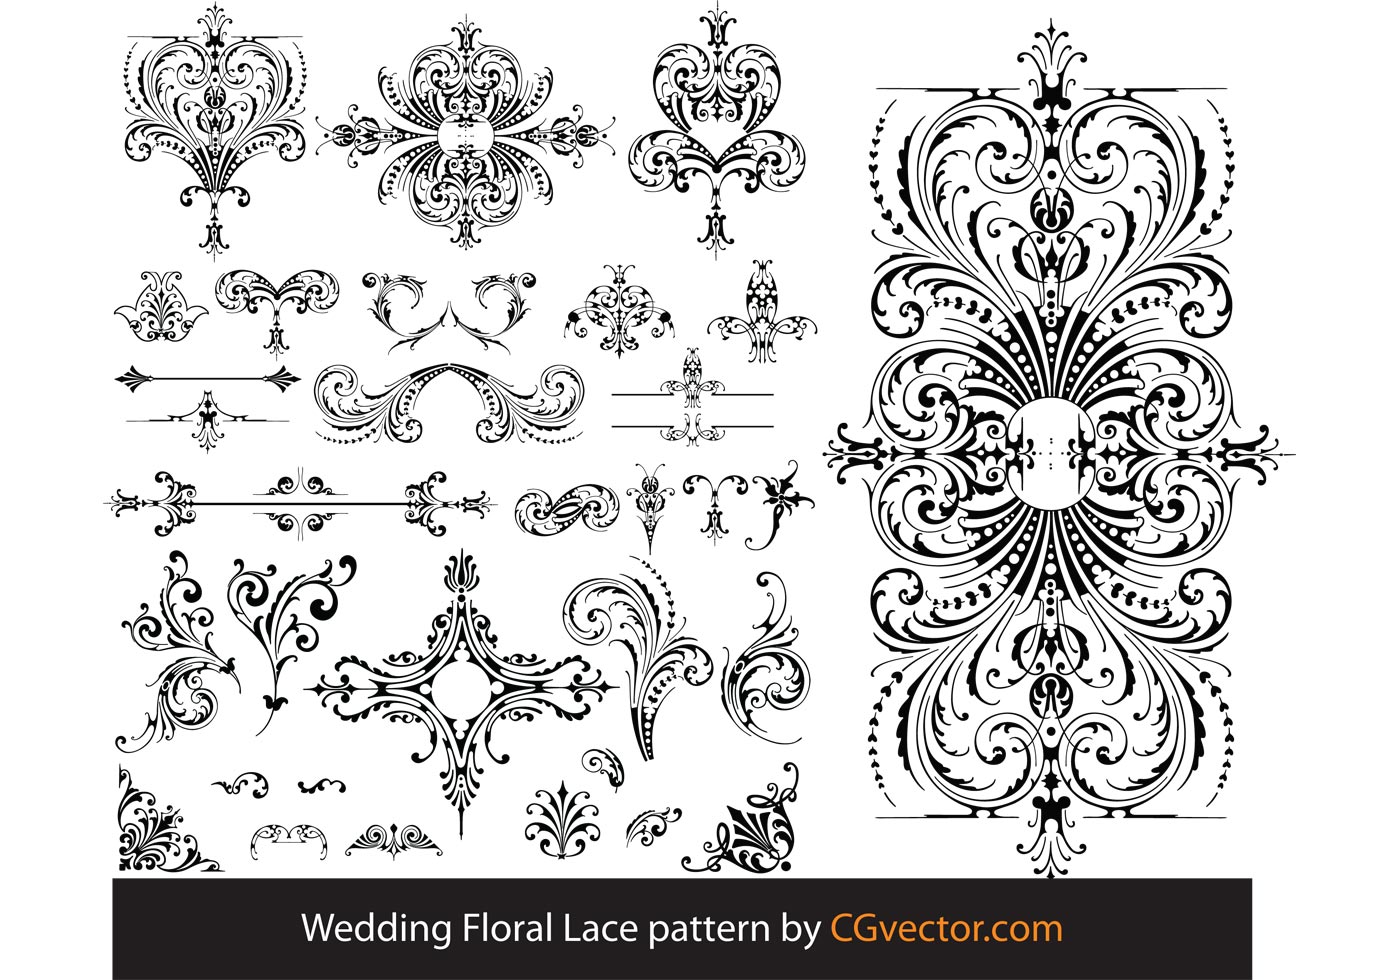 Download Wedding Floral Lace pattern vector - Download Free Vector Art, Stock Graphics & Images